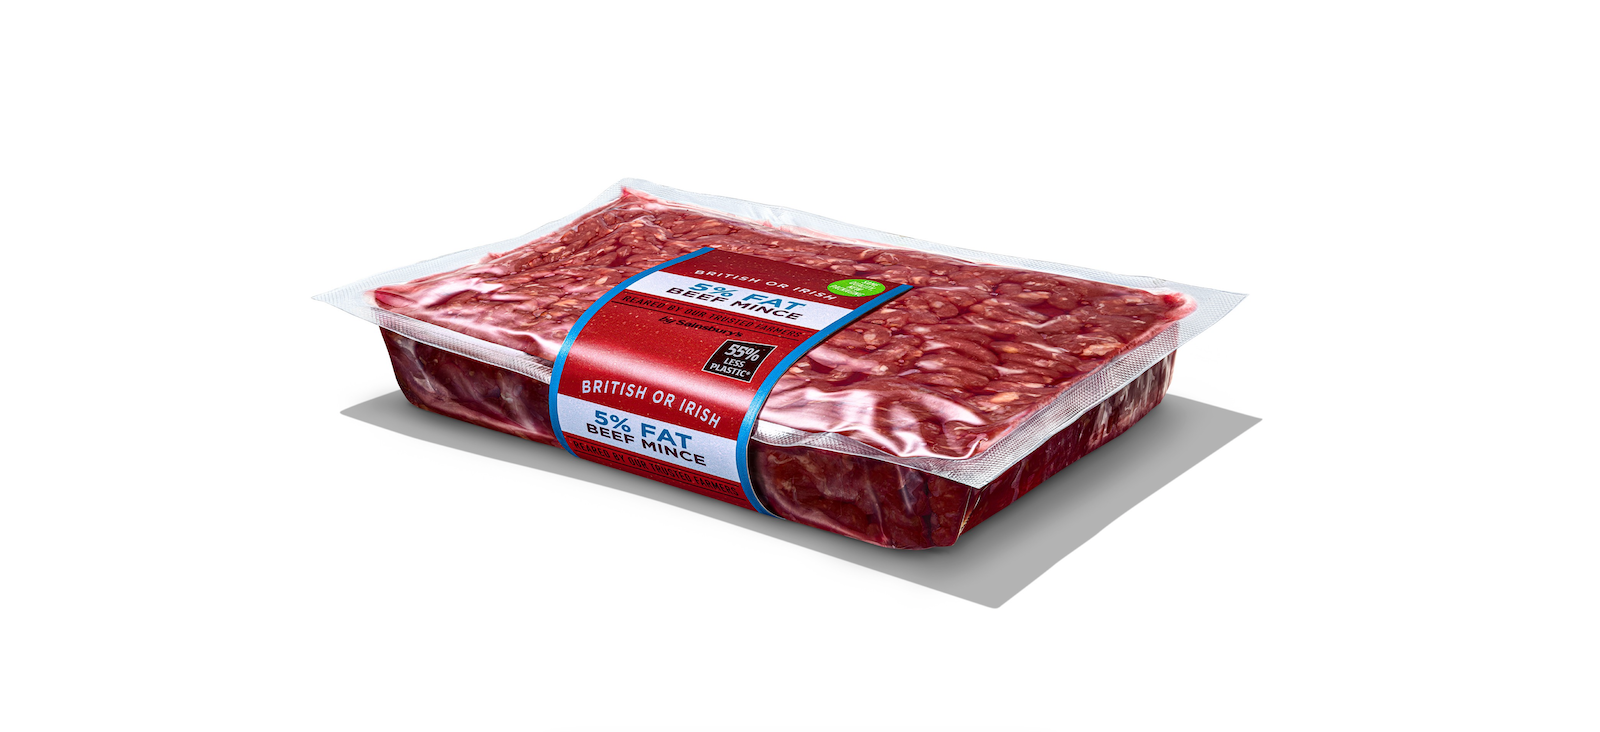 Sainsbury's switches to vacuum-sealed packaging for beef mince